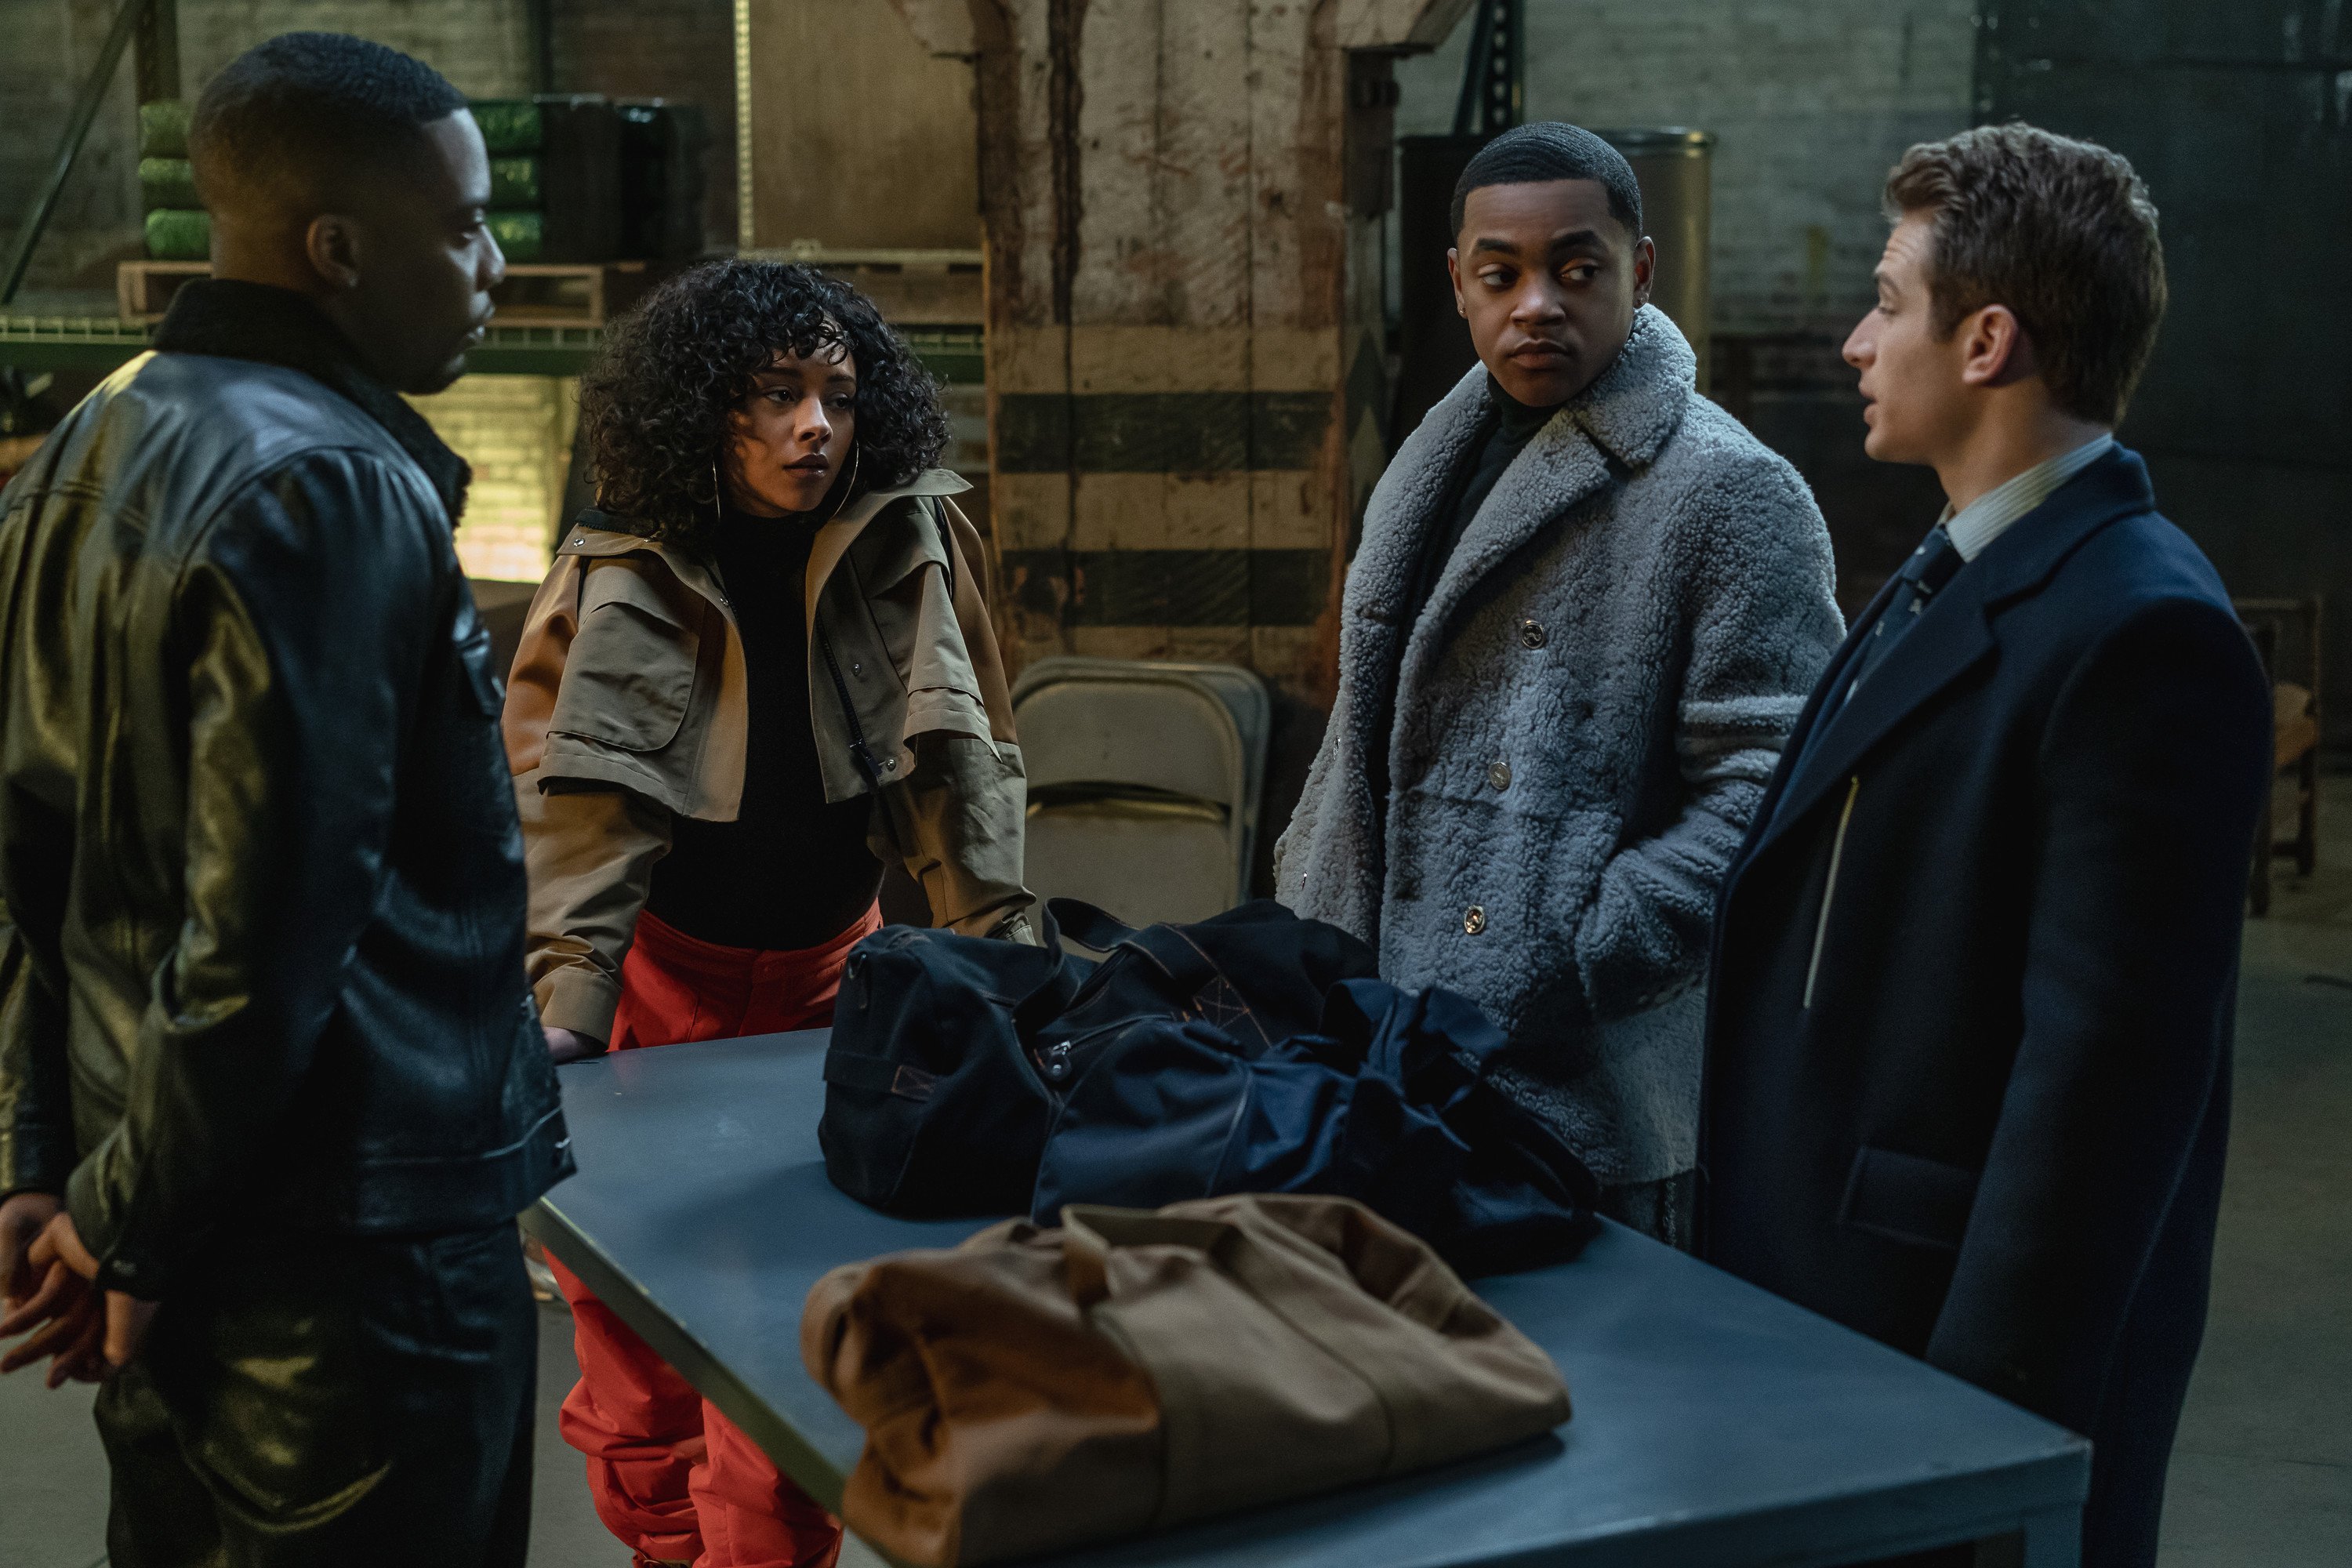 Woody McClain as Cane Tejada, Alix Lapri as Effie Morales, Michael Rainey Jr. as Tariq St. Patrick and Gianni Paolo as Brayden Weston standing around a table conversing in 'Power Book II: Ghost'